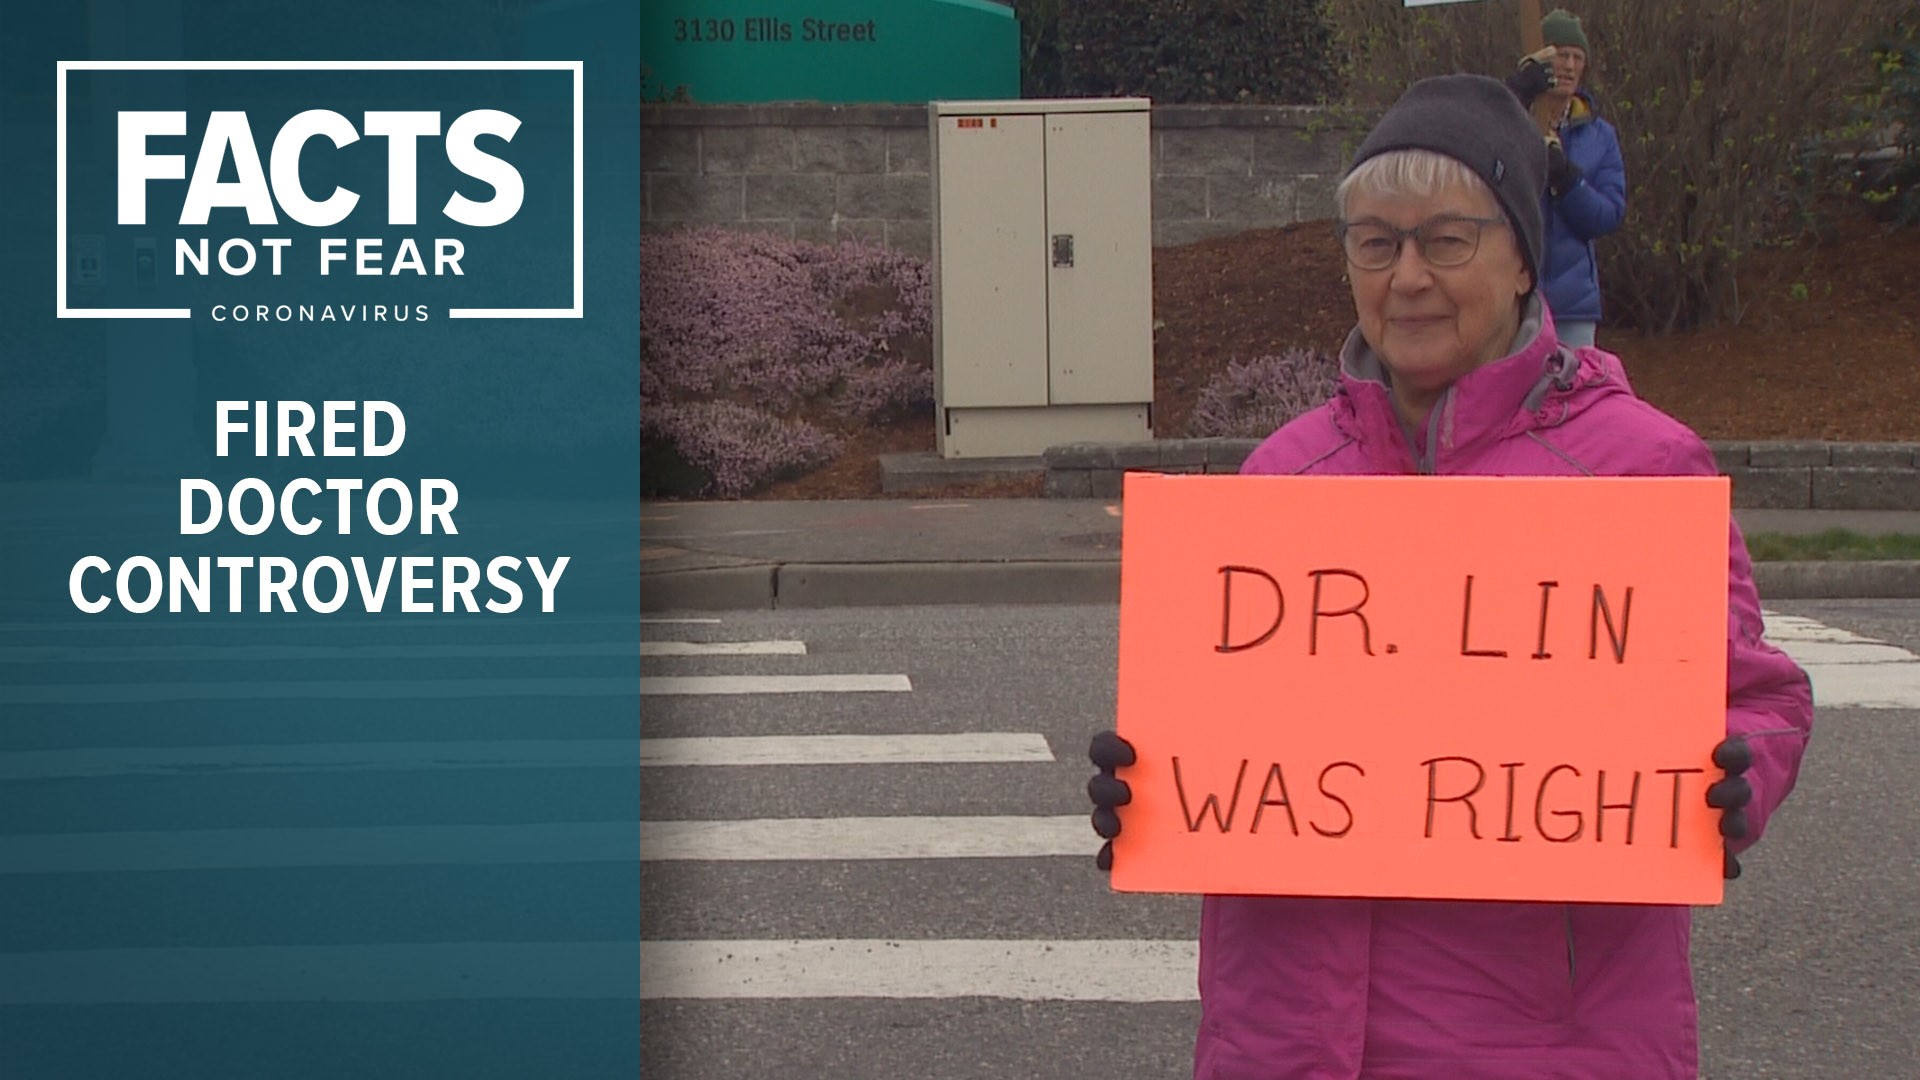 A Bellingham doctor is speaking out after losing his job, for according to him, raising safety concerns about how his hospital was dealing with the coronavirus.